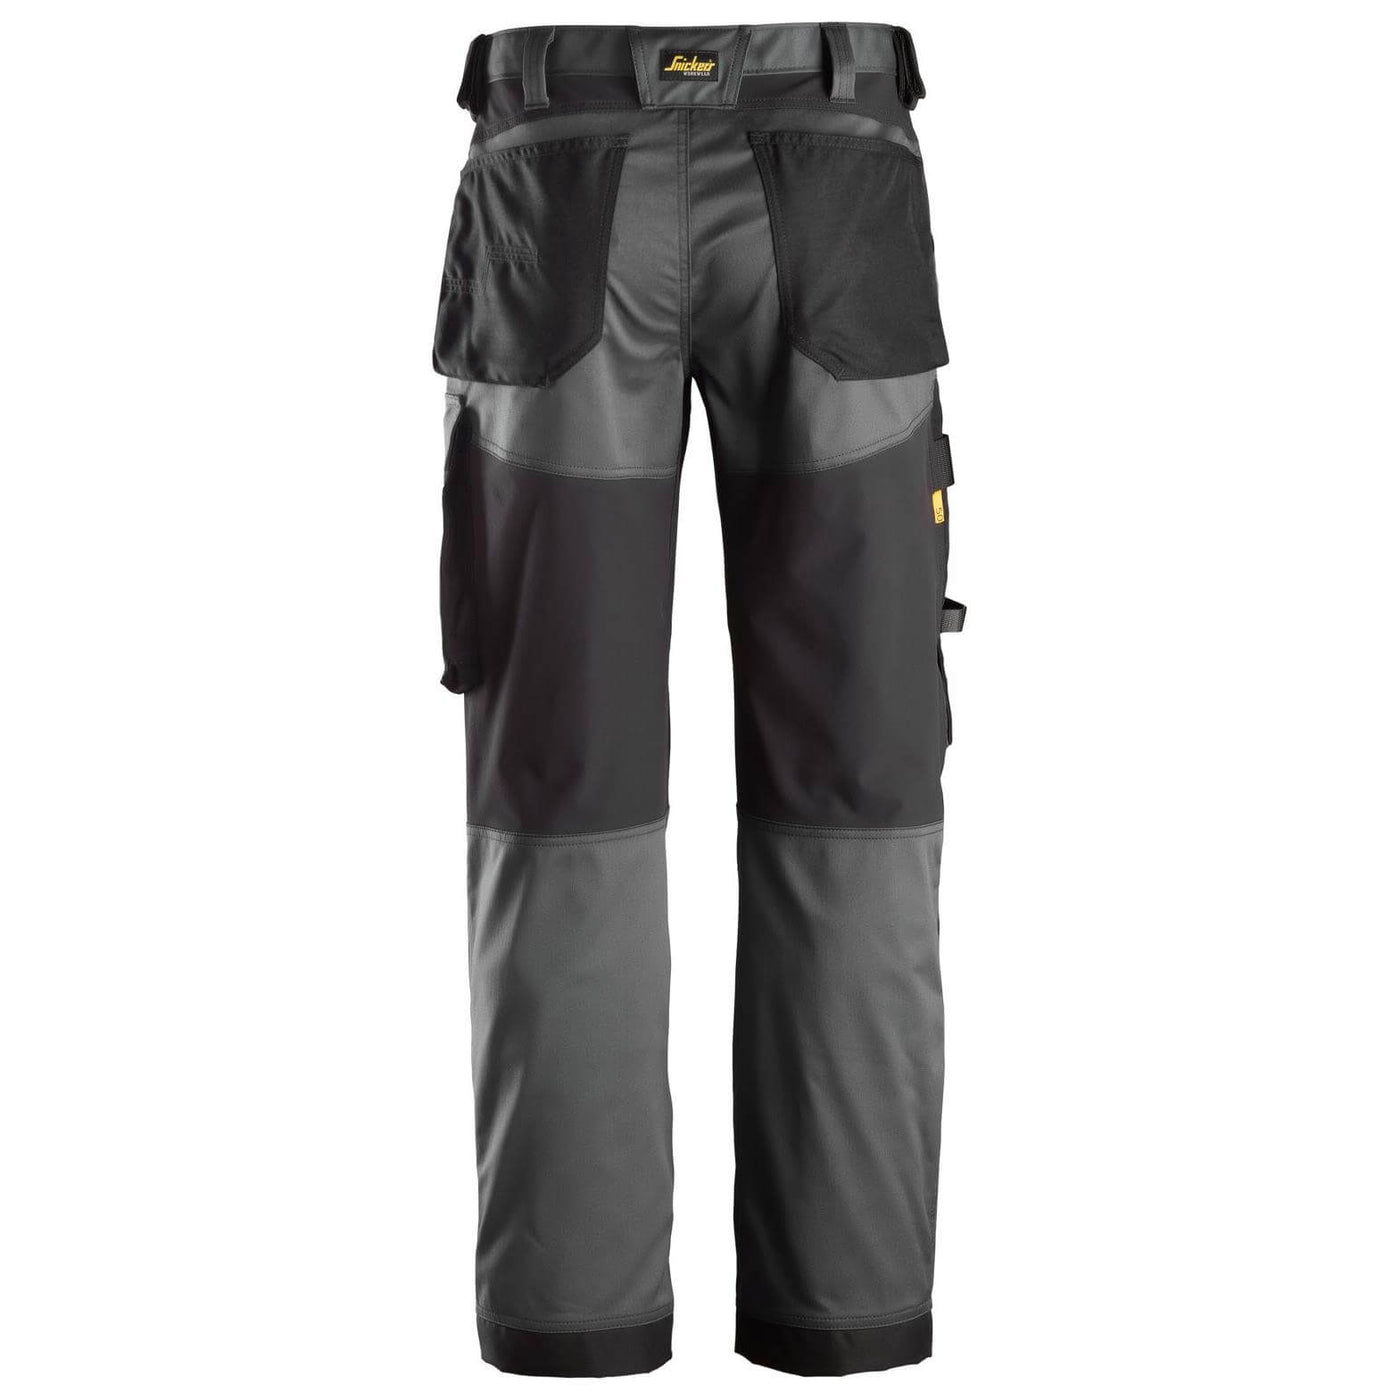 Snickers 6351 AllroundWork Stretch Loose Fit Work Trousers Steel Grey Black back #colour_steel-grey-black